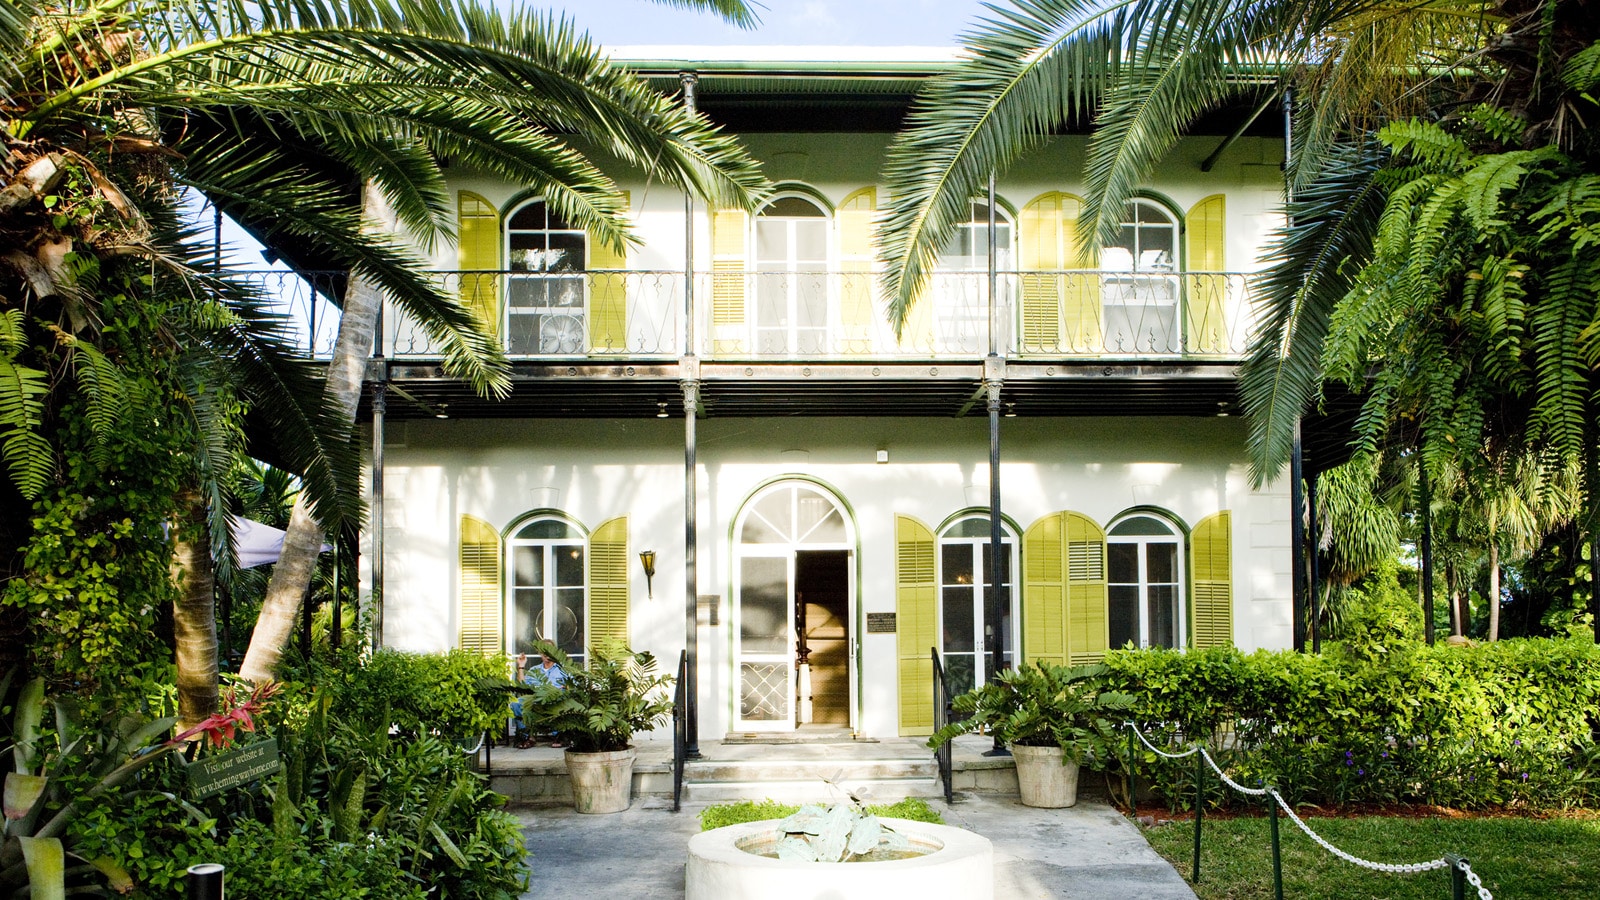 The Hemingway Home And Museum